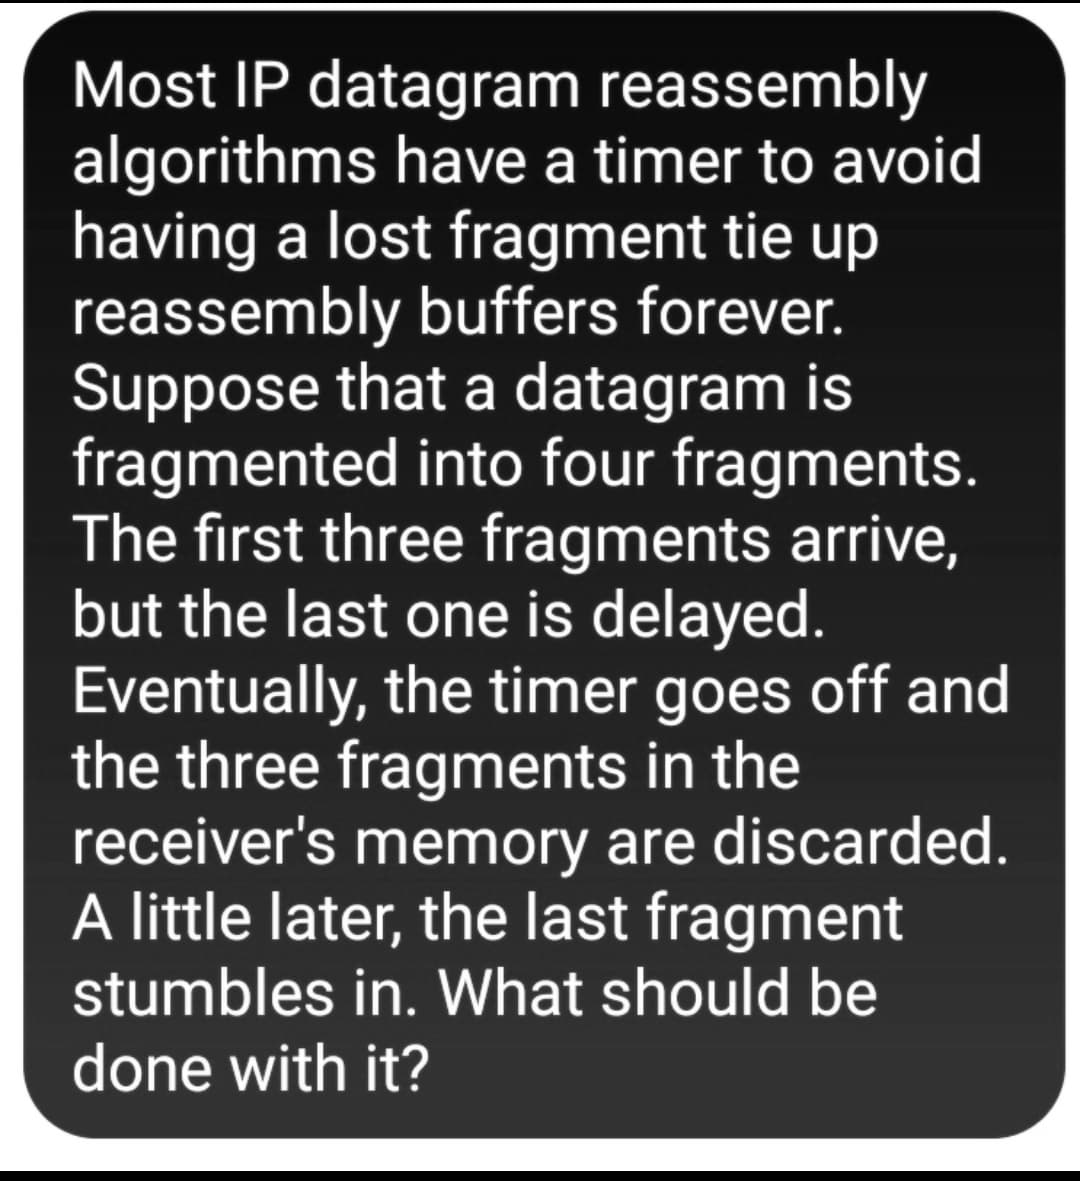 Most IP datagram reassembly
algorithms have a timer to avoid
having a lost fragment tie up
reassembly buffers forever.
Suppose that a datagram is
fragmented into four fragments.
The first three fragments arrive,
but the last one is delayed.
Eventually, the timer goes off and
the three fragments in the
receiver's memory are discarded.
A little later, the last fragment
stumbles in. What should be
done with it?